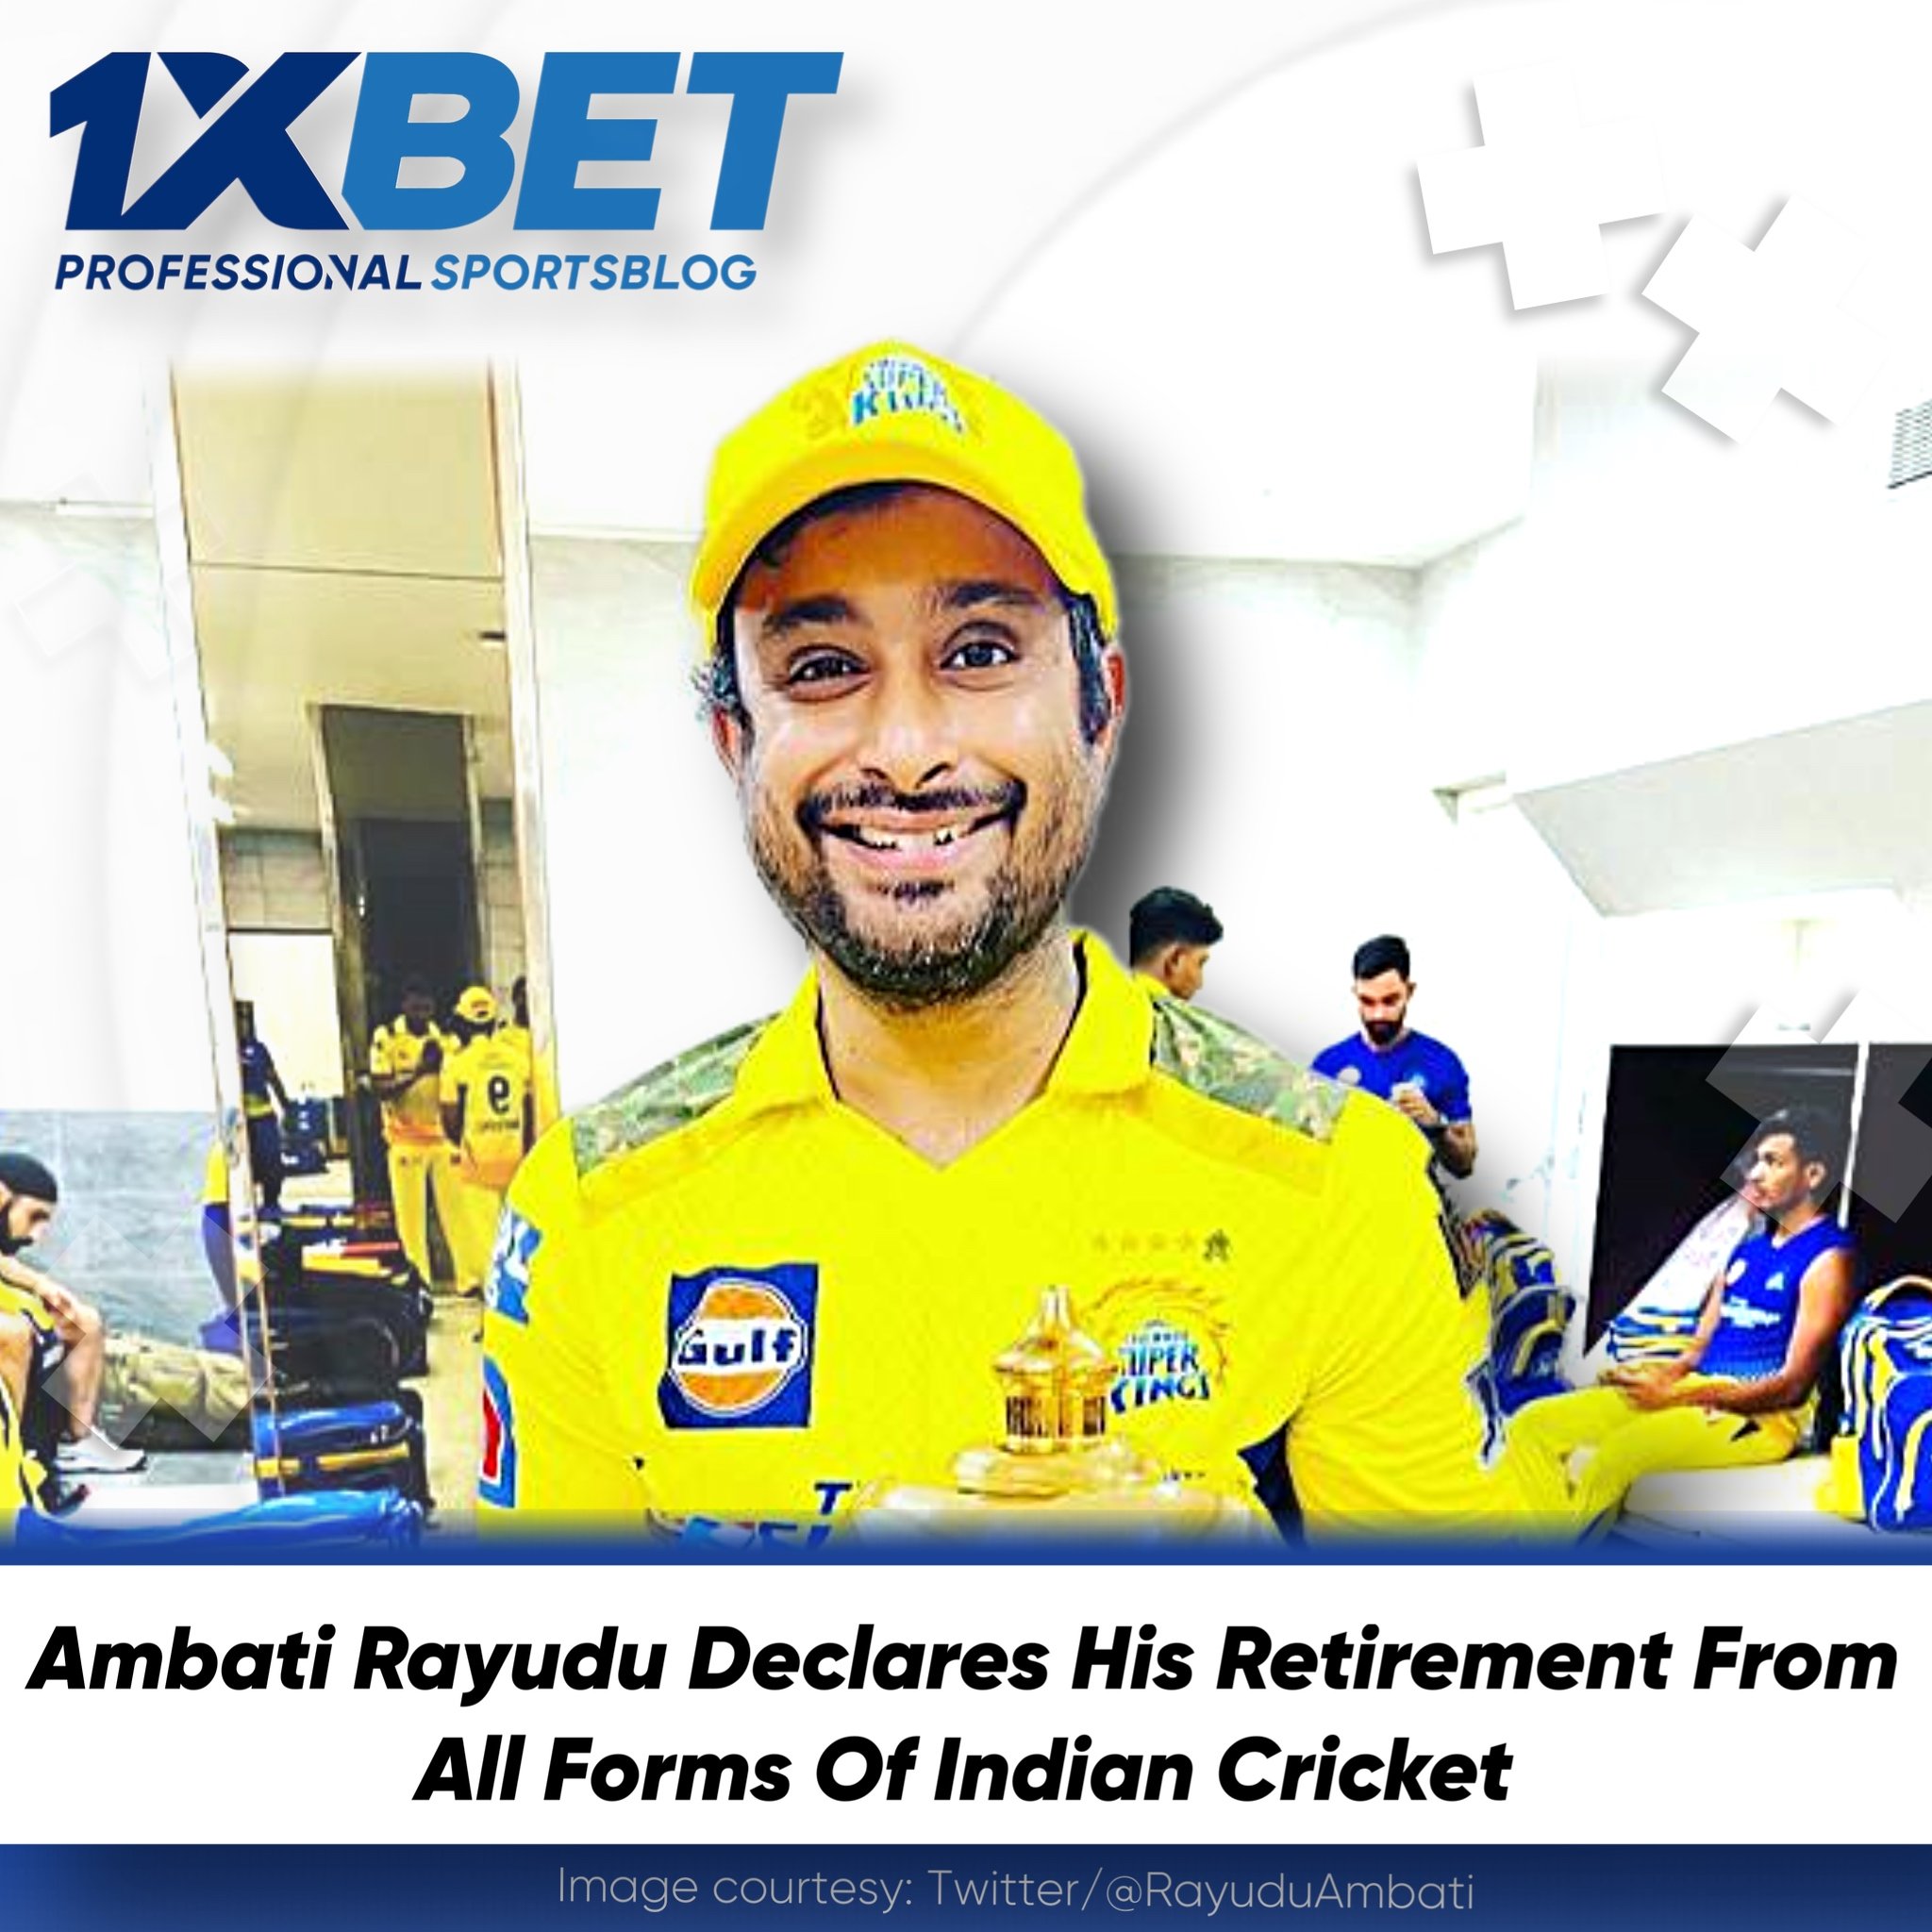 Ambati Rayudu Declares His Retirement From All Forms Of Indian Cricket